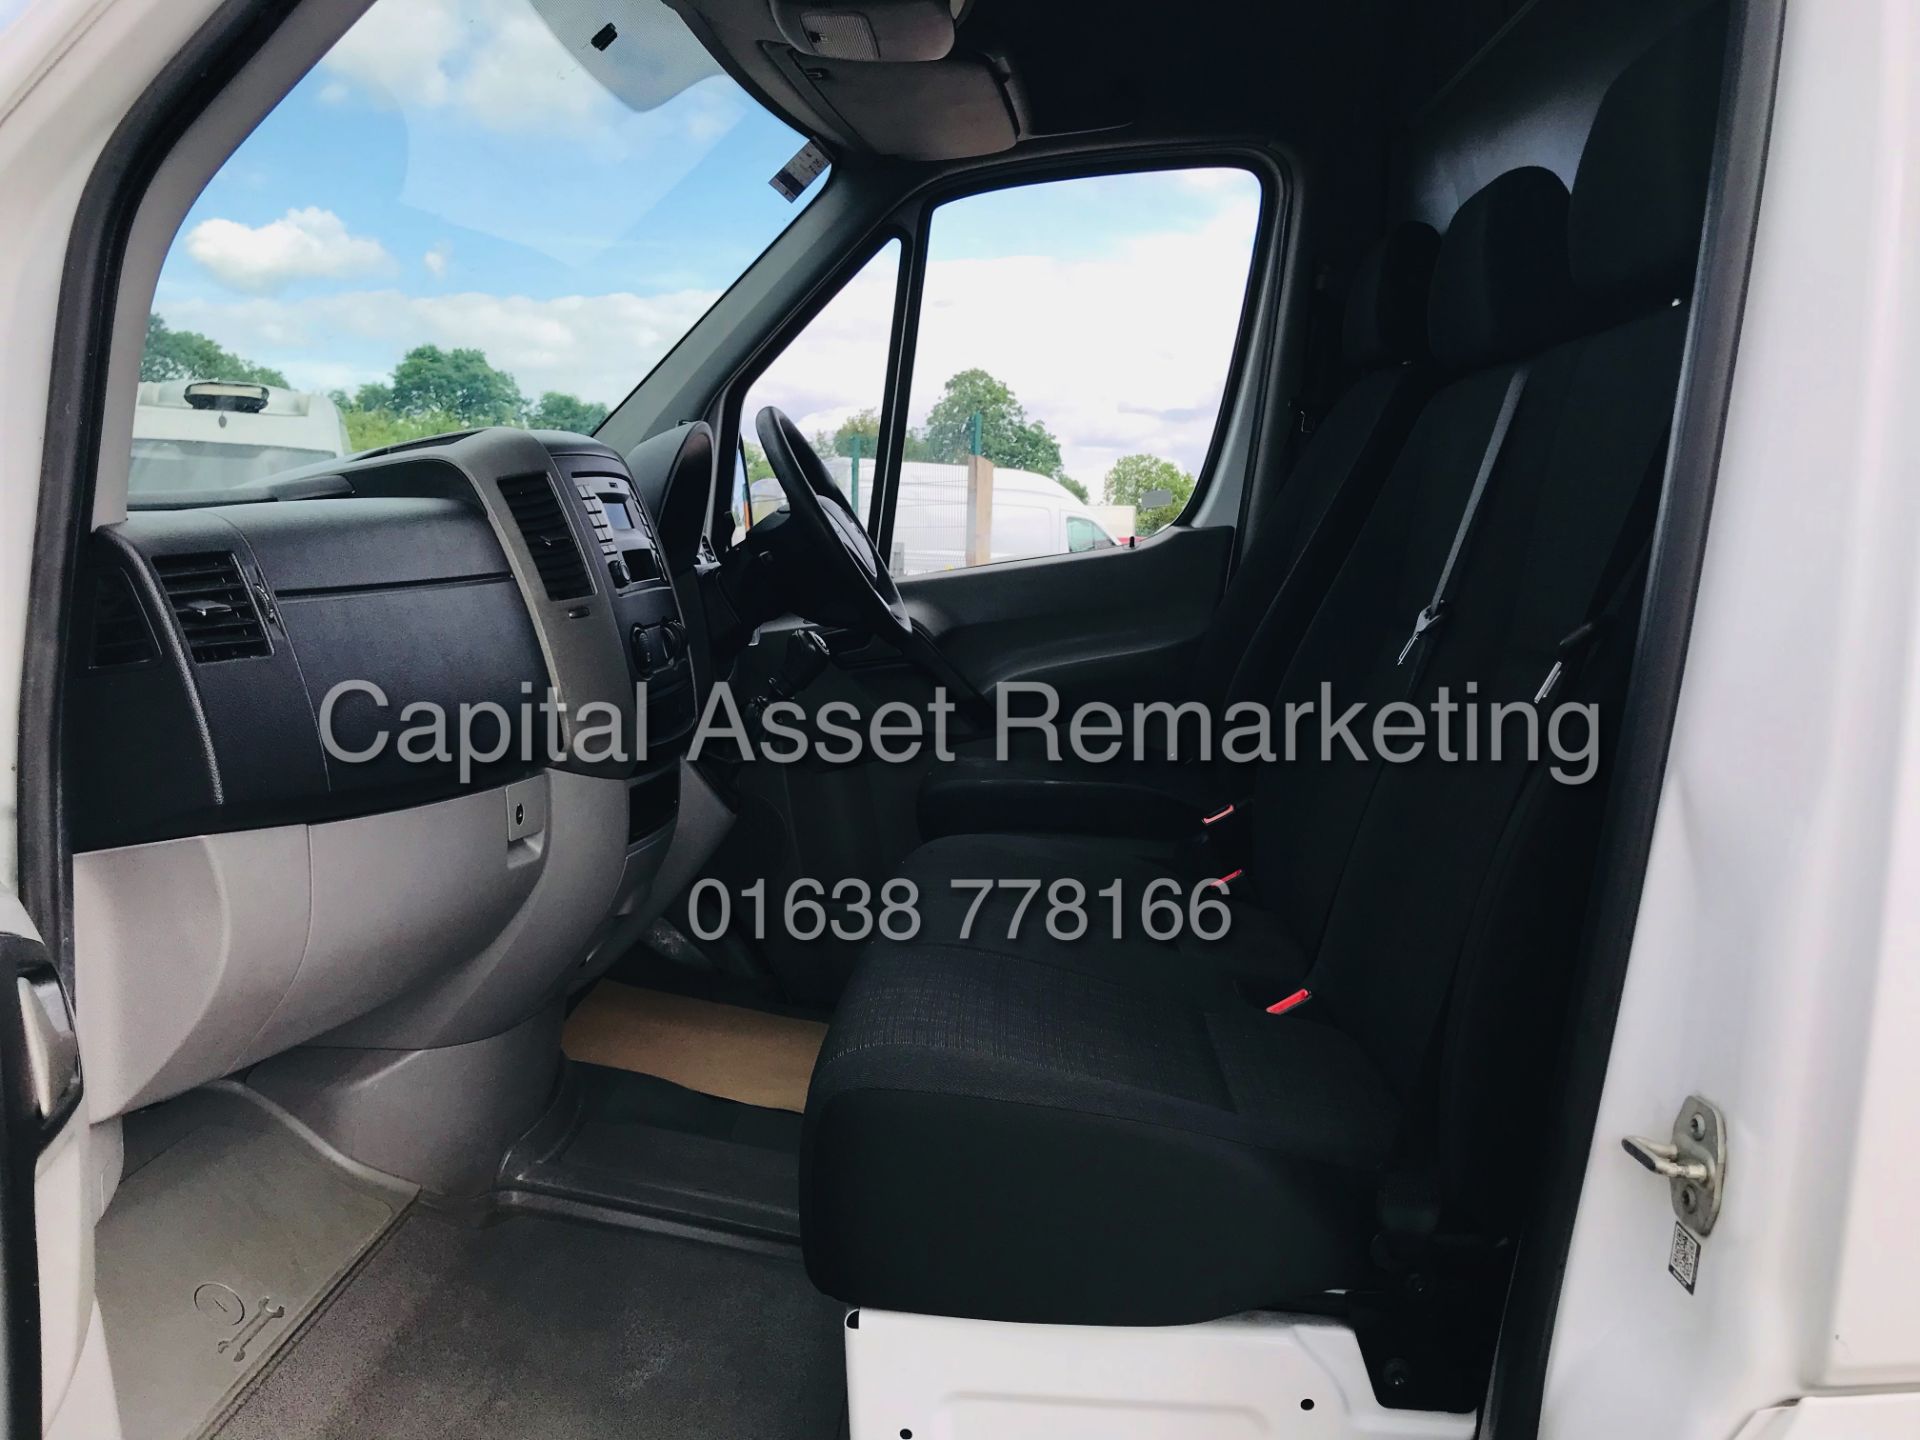 MERCEDES SPRINTER 314CDI LWB (2018 MODEL) WITH FITTED TAIL LIFT - 1 OWNER FSH - CRUISE *RARE* - Image 17 of 19